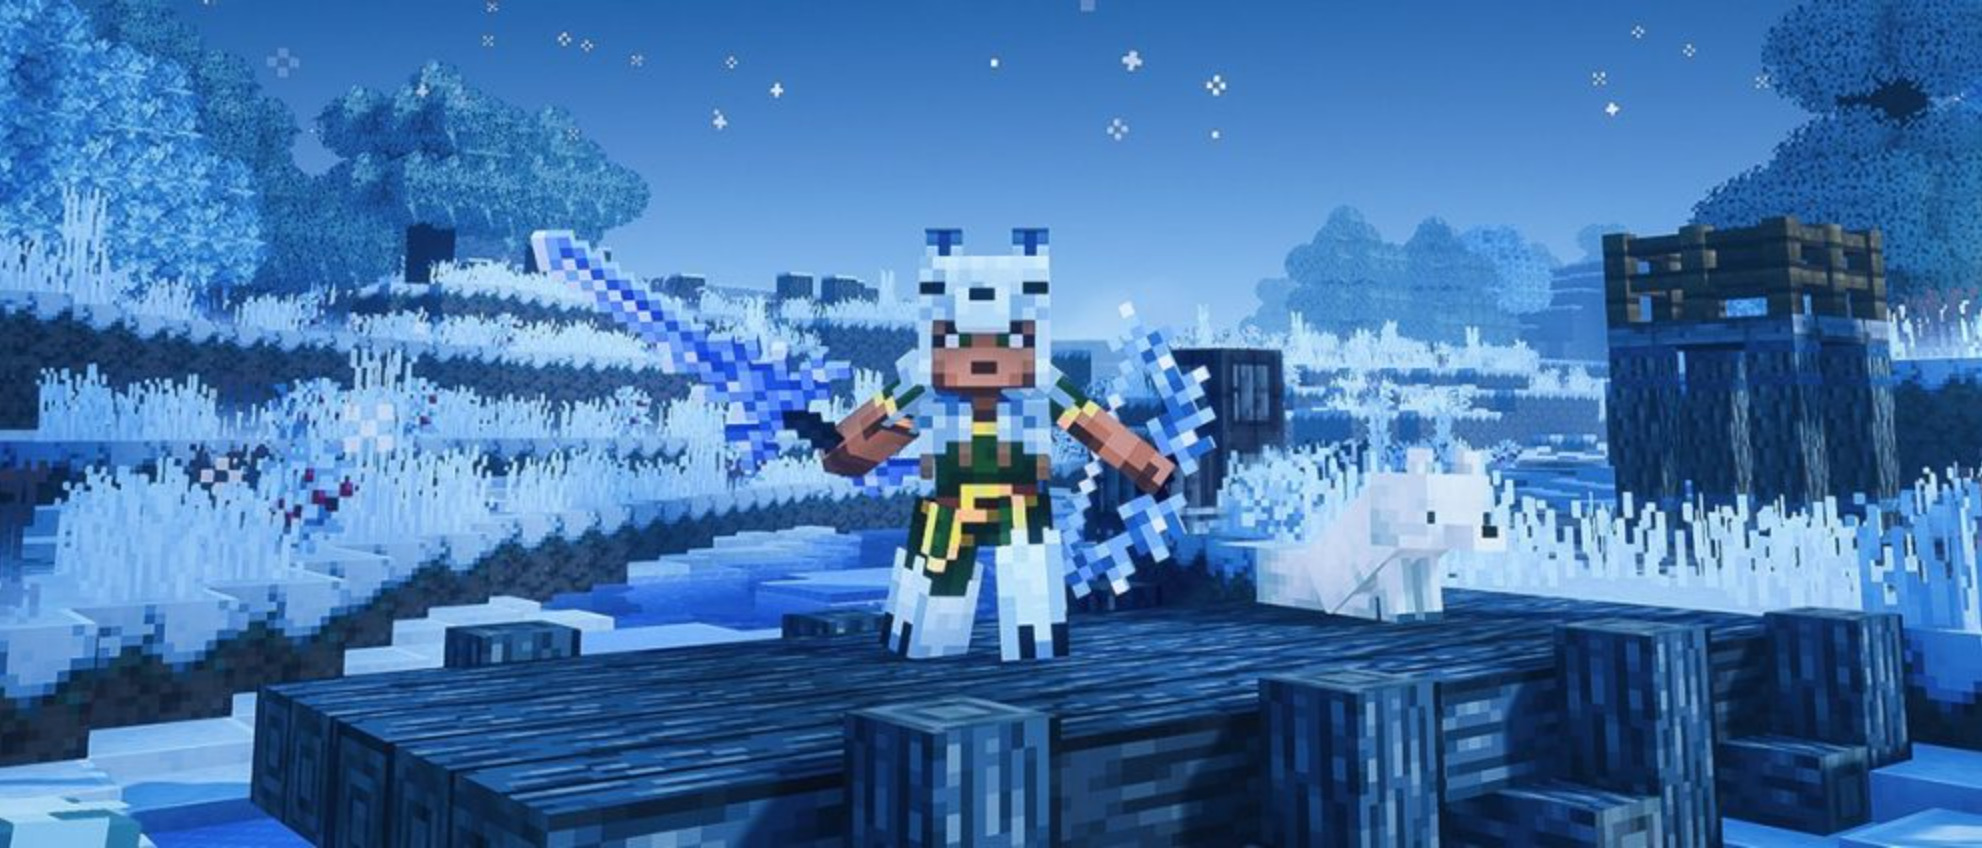 Minecraft Dungeons: Chills And Thrills Seasonal Event Is Live